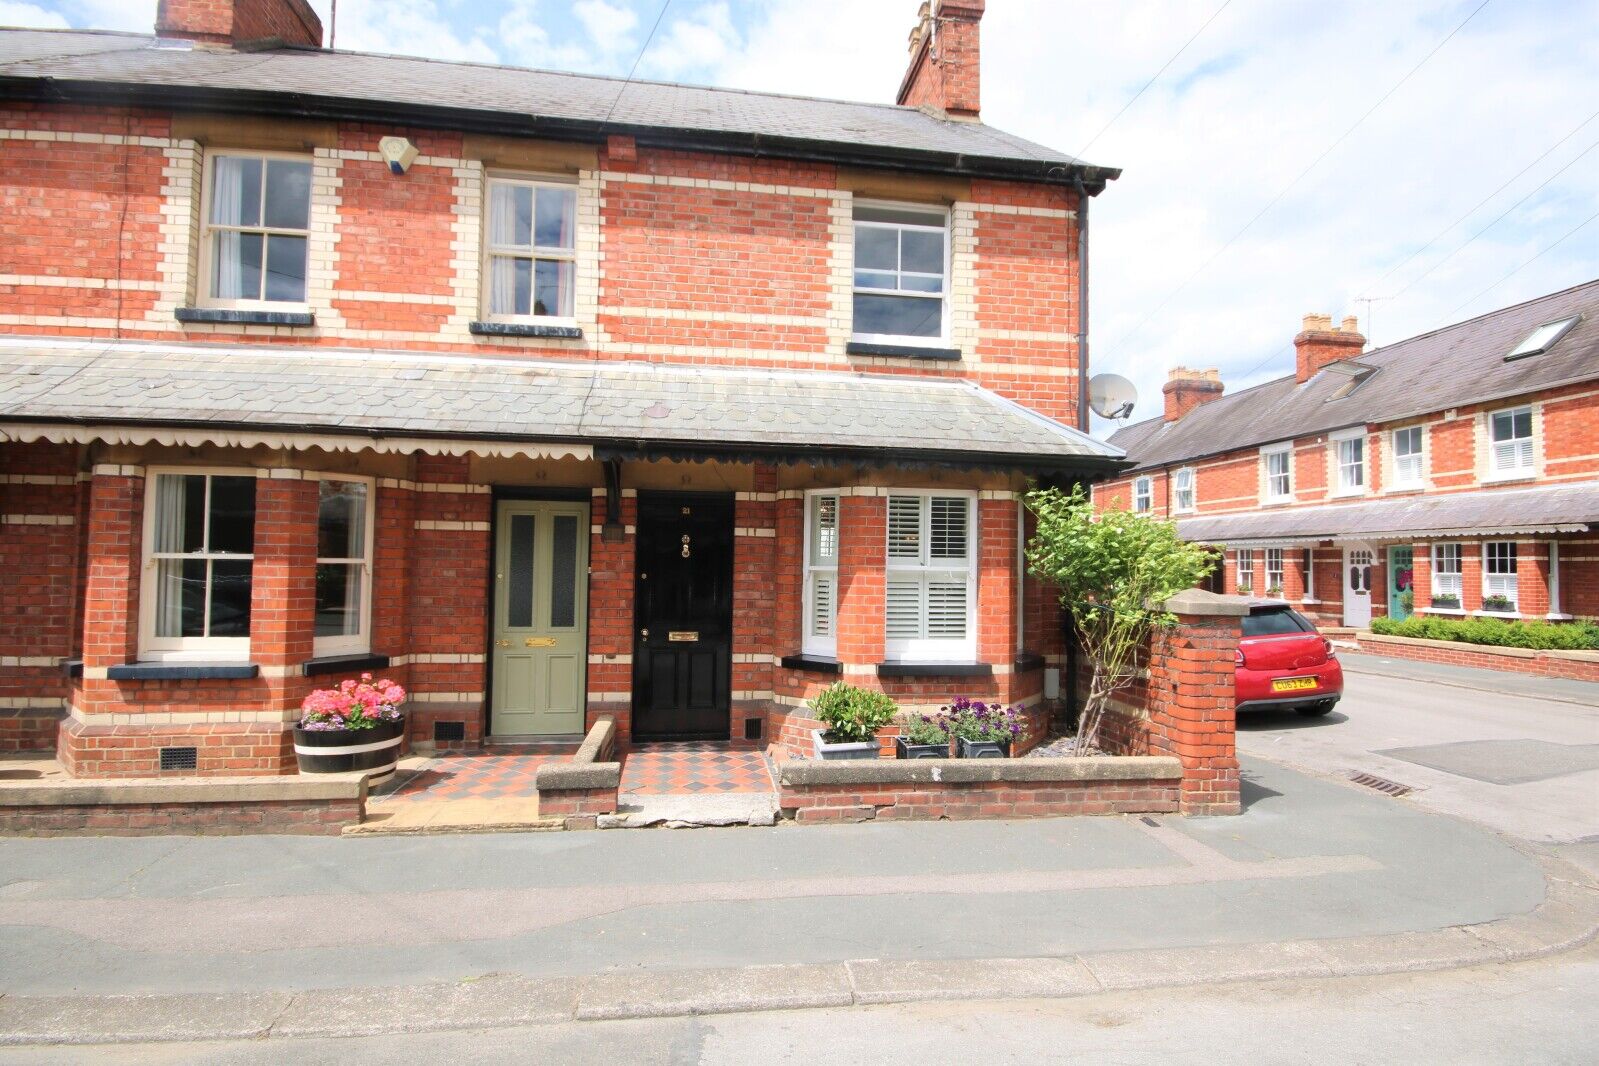 2 bedroom end terraced house to rent, Available from 01/05/2025 Marmion Road, Henley-on-Thames, RG9, main image